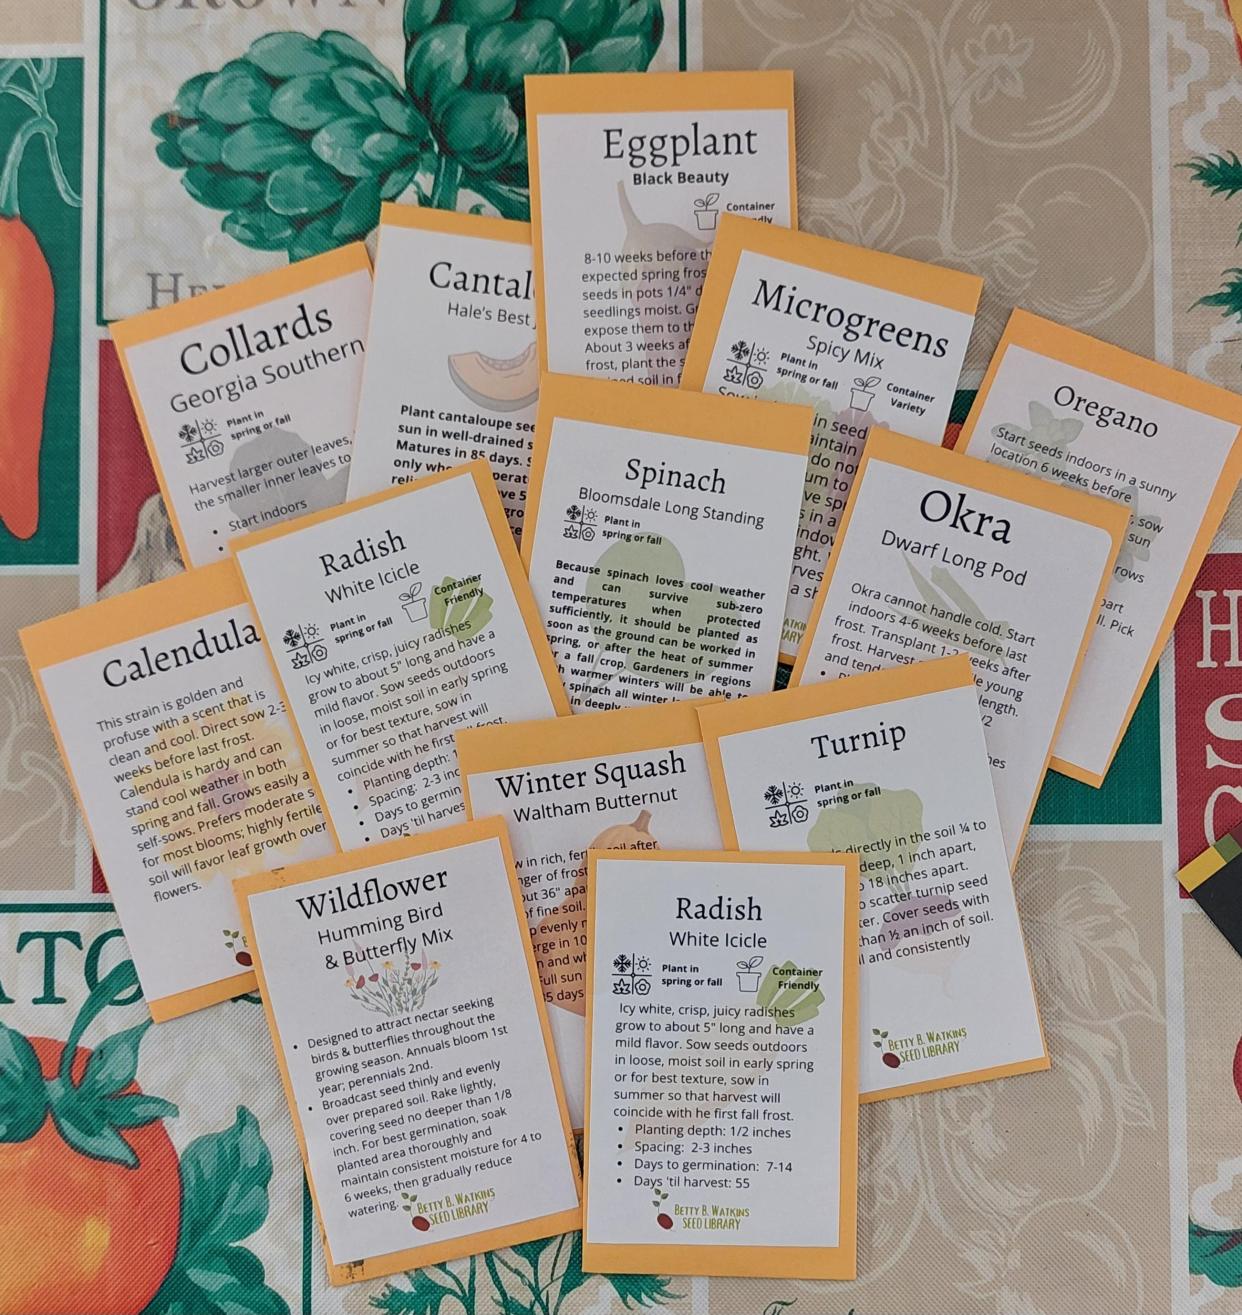 The Oconee County Library System's seed library program offers more than 70 types of vegetables, herbs and flowers with nearly 230 varieties.